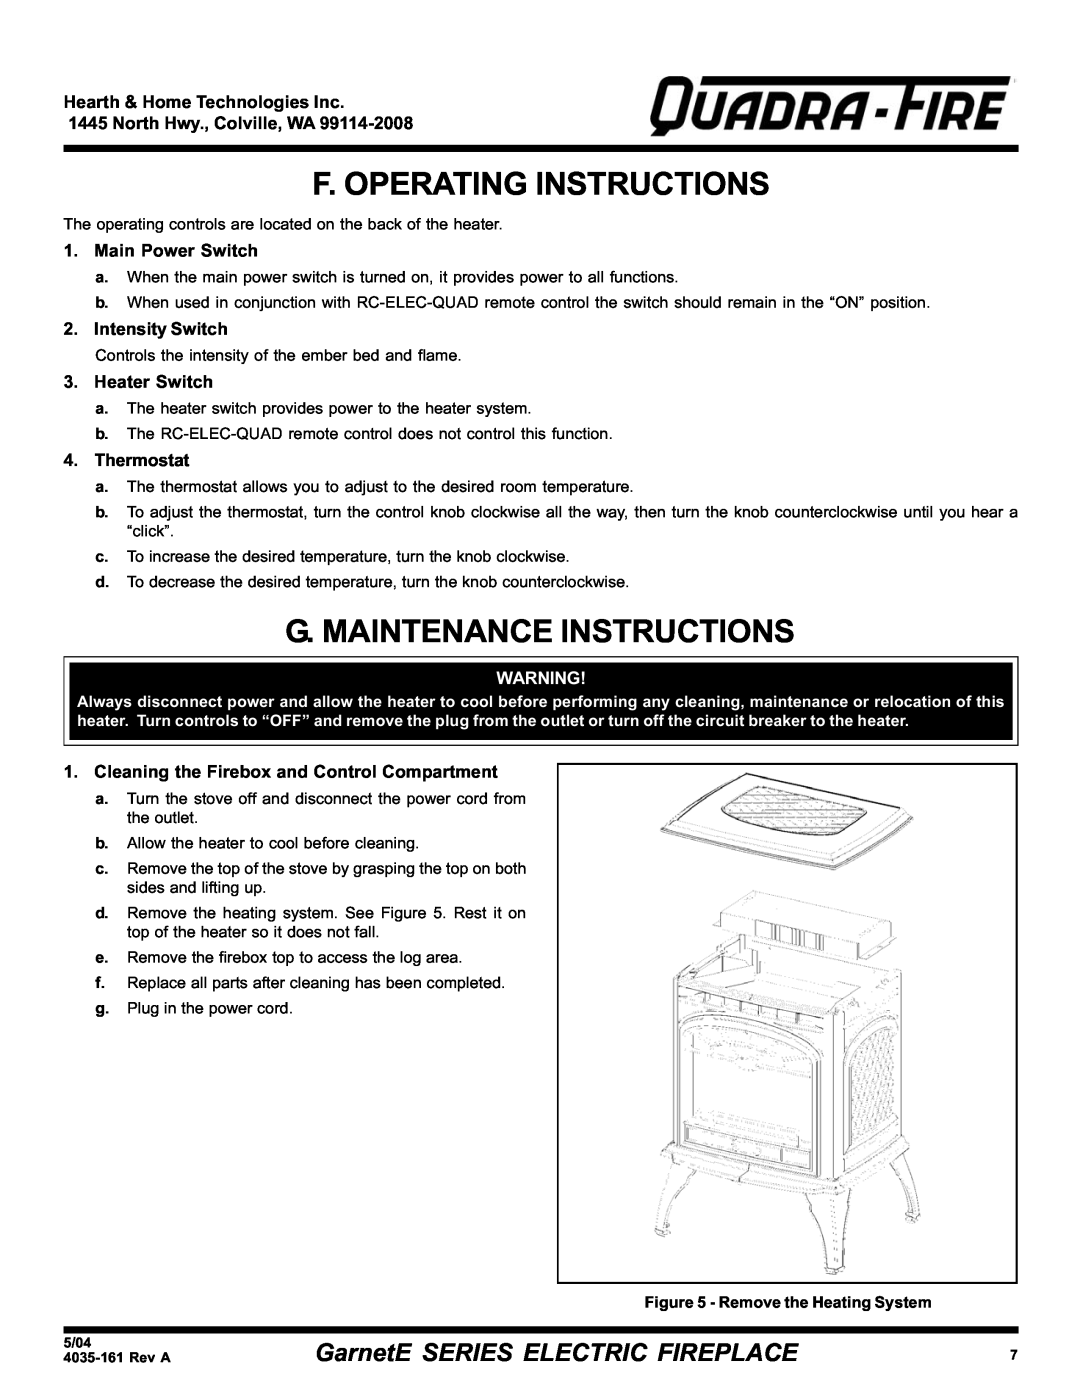 Hearth and Home Technologies GarnetE SERIES F. Operating Instructions, G. Maintenance Instructions, Main Power Switch 